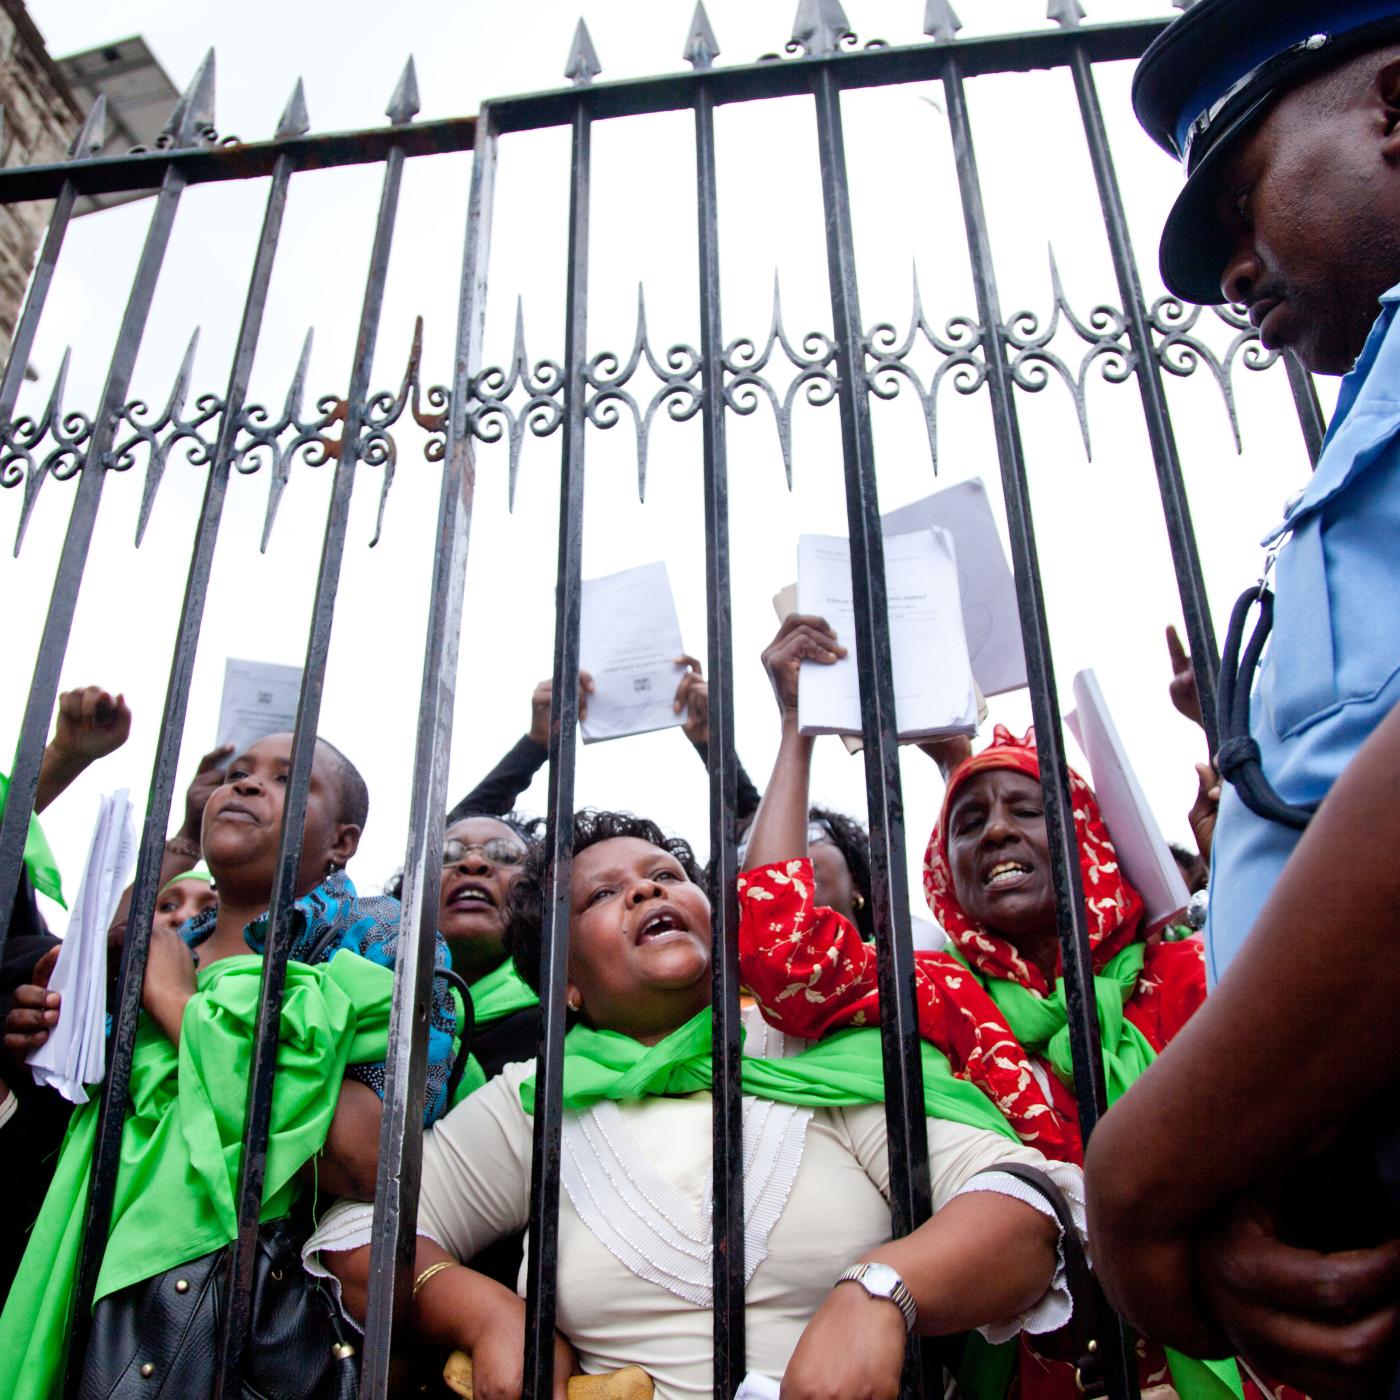 An iron fence separates a police officer and a crowd of protesting women.